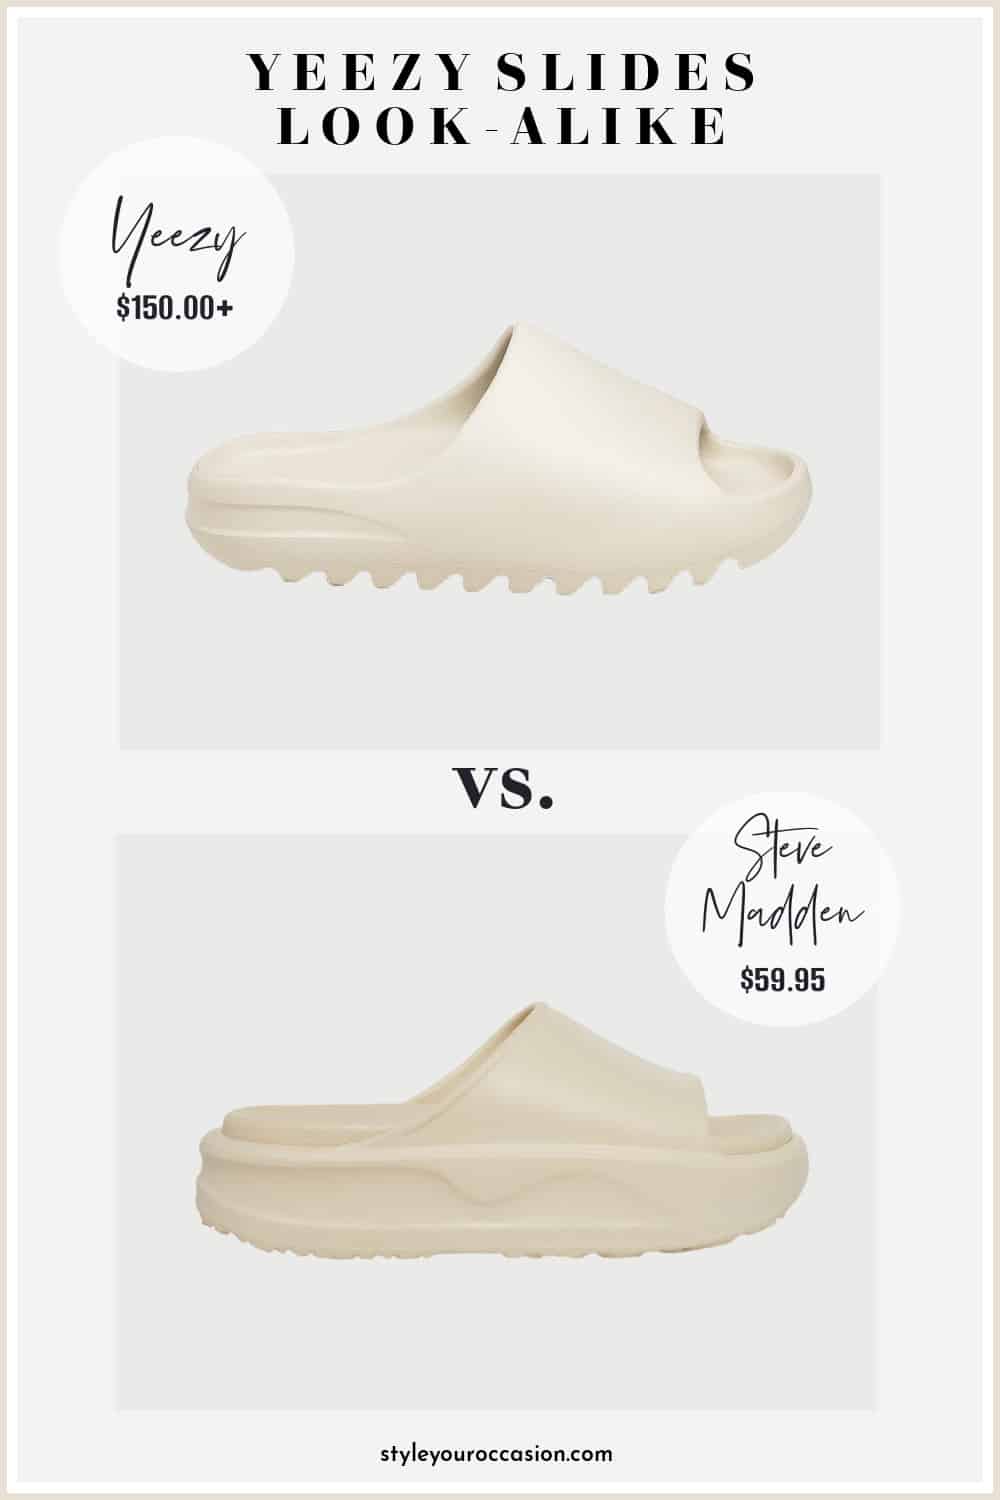 image comparing Yeezy slides with an ivory color look-alike sandal from Steve Madden